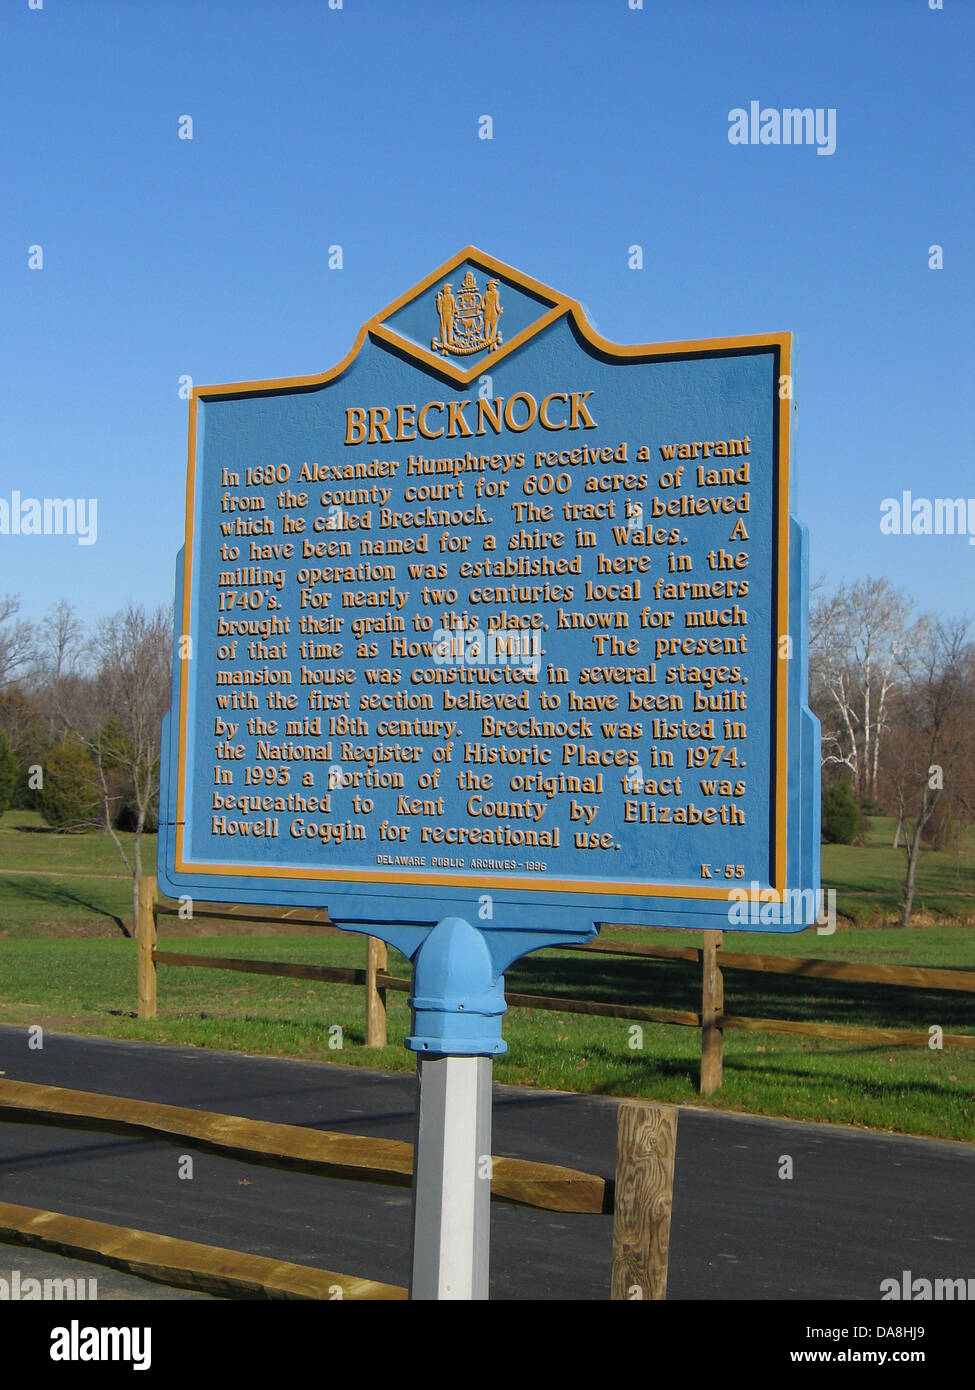 BRECKNOCK  In 1680 Alexander Humphreys received a warrant from the county court for 600 acres of land which he called Brecknock. Stock Photo